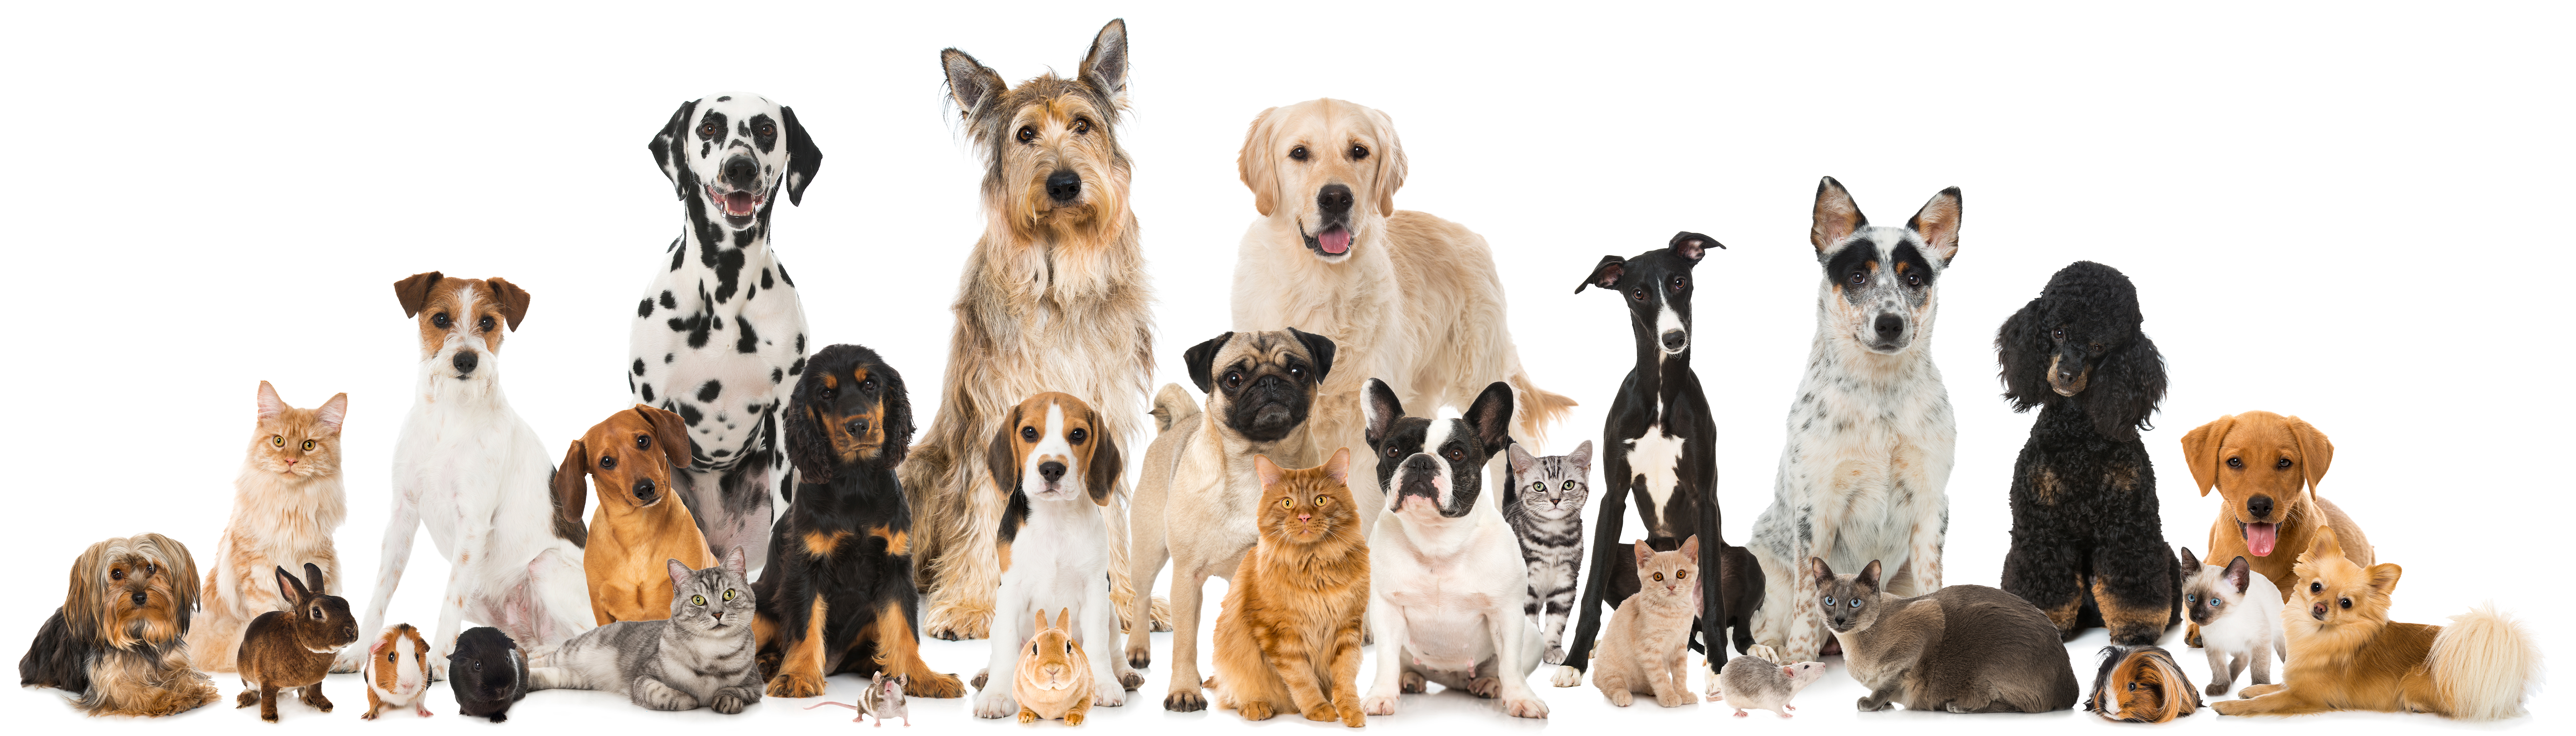 Assortment of dogs, cats, and other pets sitting calmly